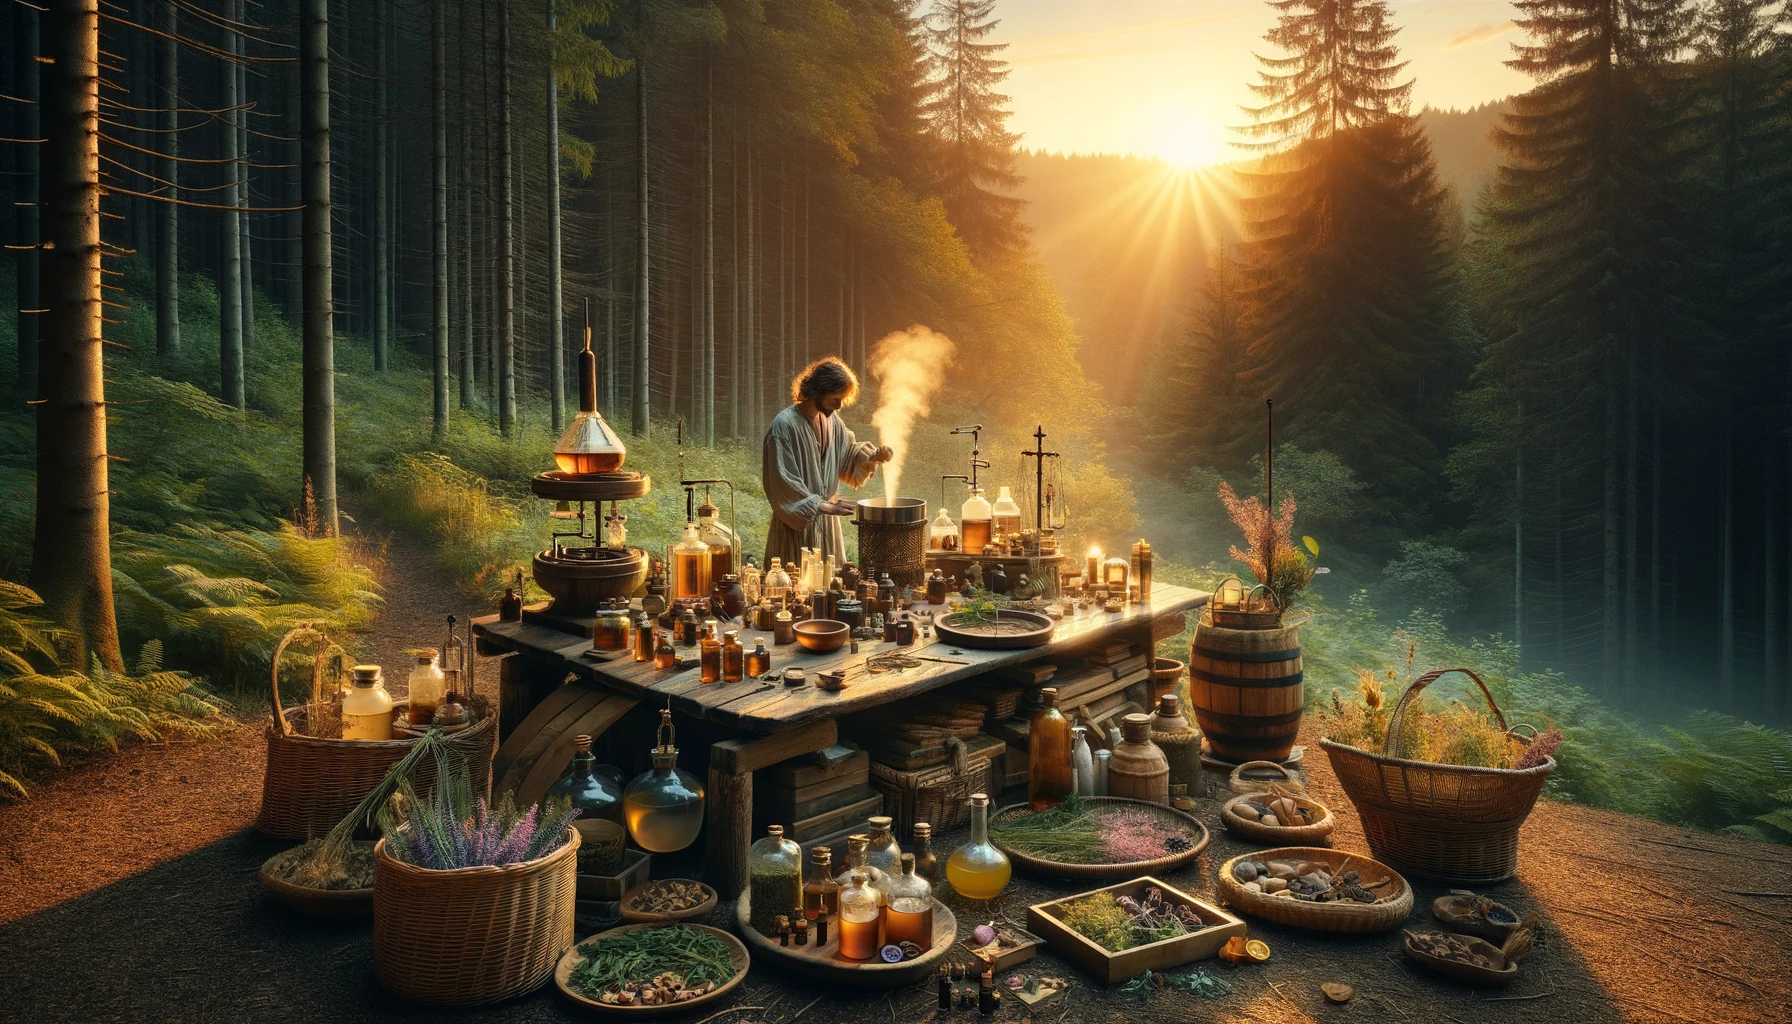 Expert herbalist crafting medicinal remedies from wild foods in a serene forest at dawn, with a workspace of wooden surfaces and natural materials. The scene includes distilling essential oils, drying herbs, and earthenware jars with tinctures, illuminated by the soft glow of sunrise. This image beautifully captures the harmony between traditional herbalism and nature, emphasizing the art and science of using wild foods for healing